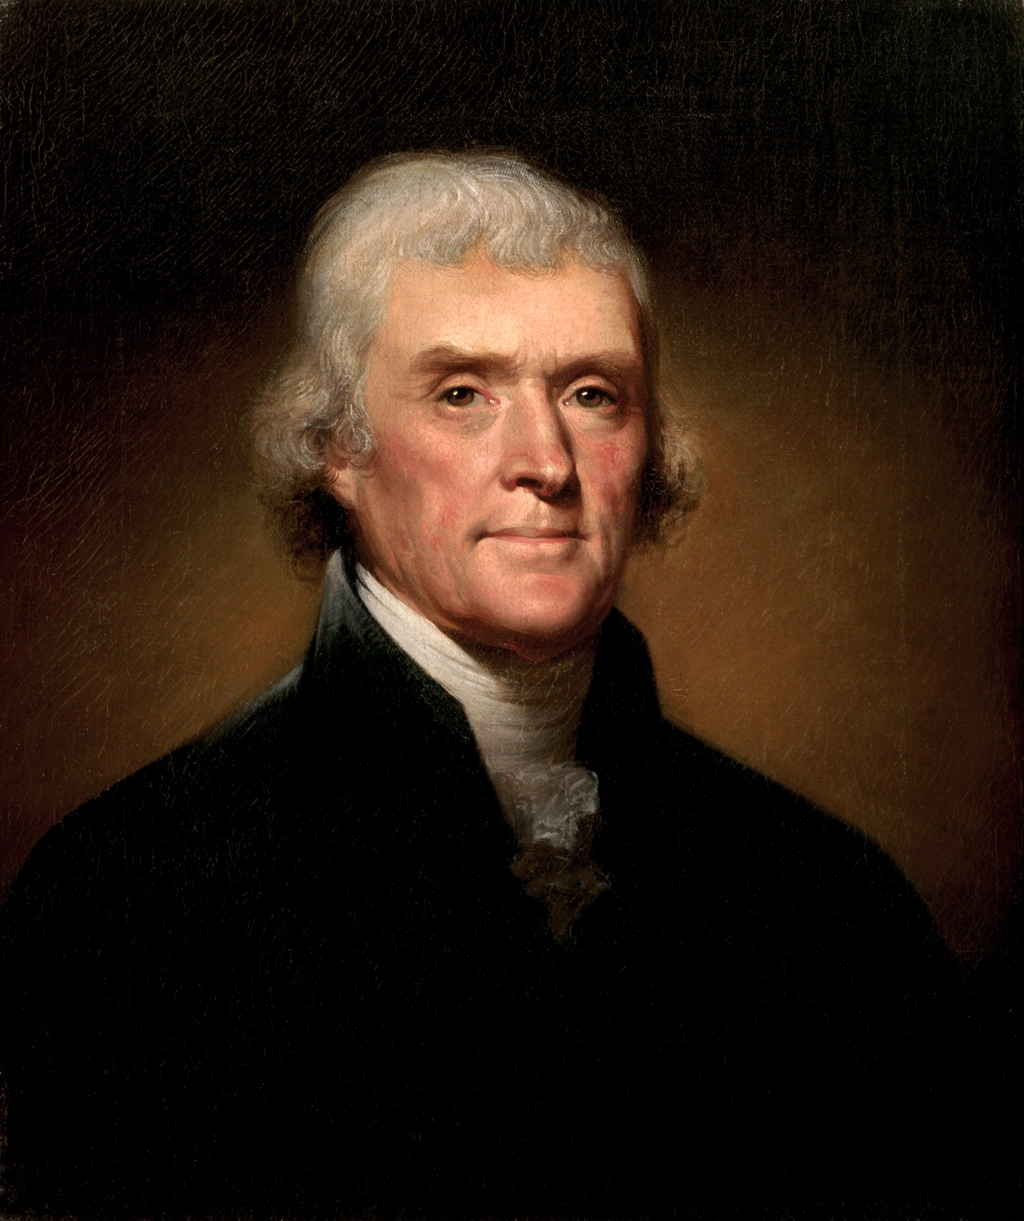 Thomas Jefferson, Founding Father and Third President of the United States